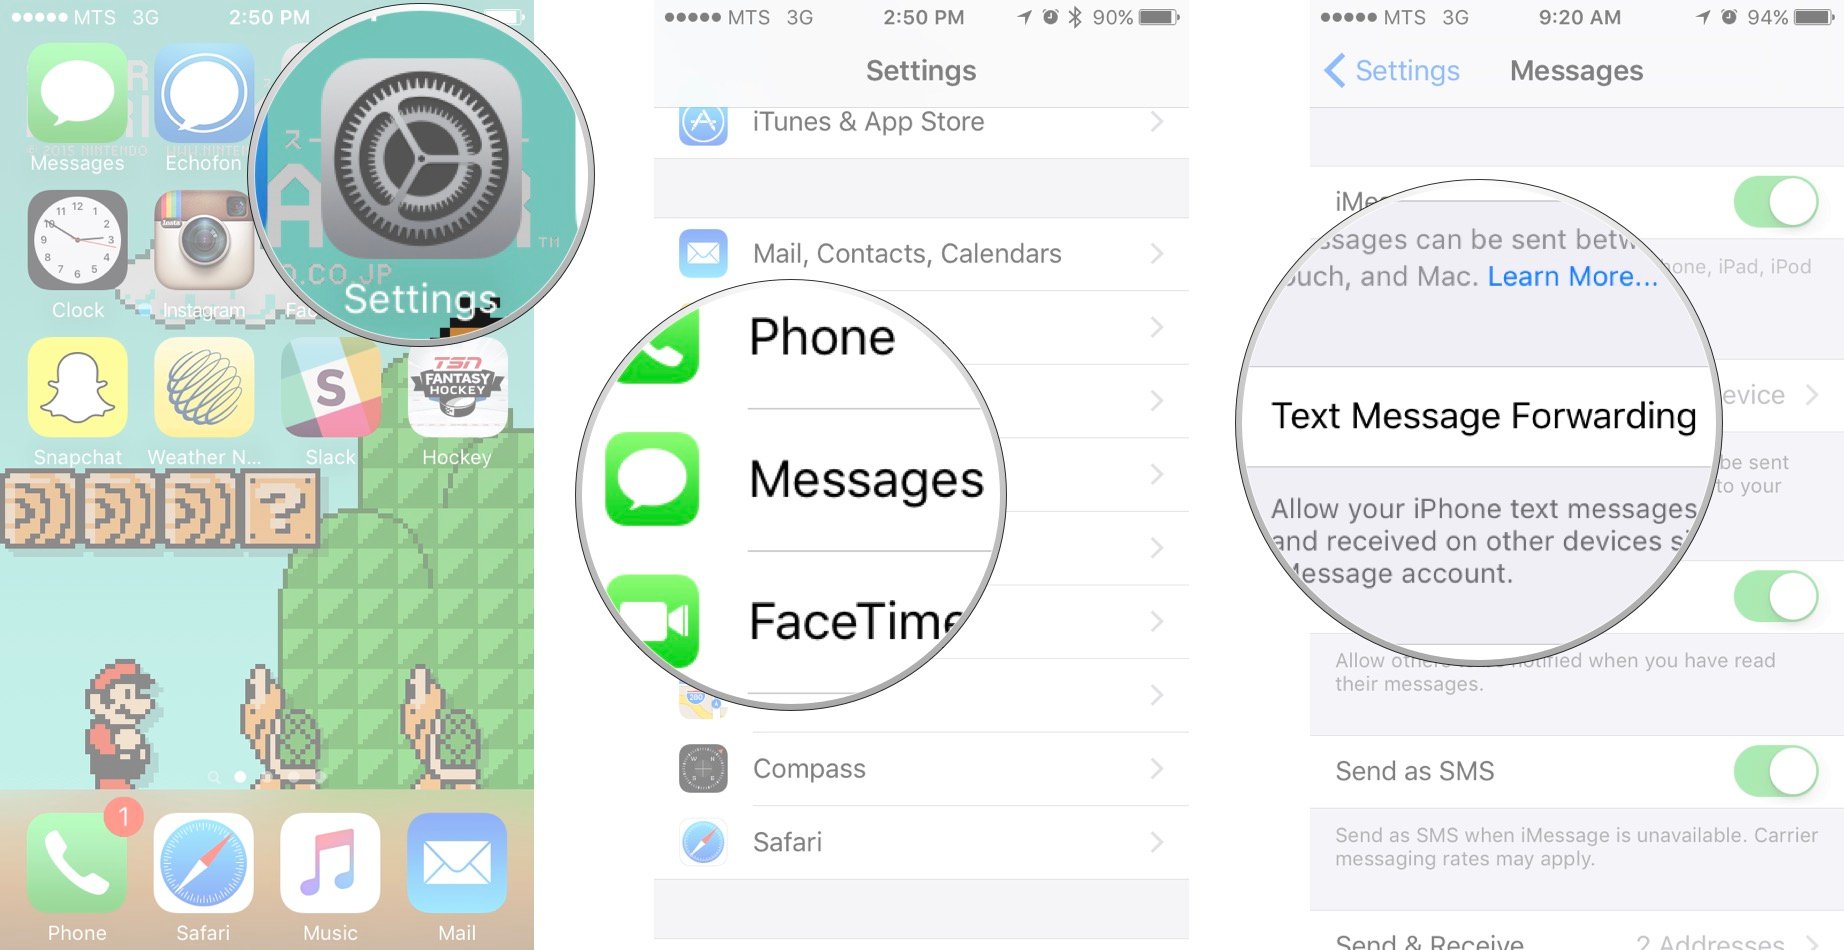 Launch the Setting app, tap on Messages, and then tap on Text Message Forwarding.